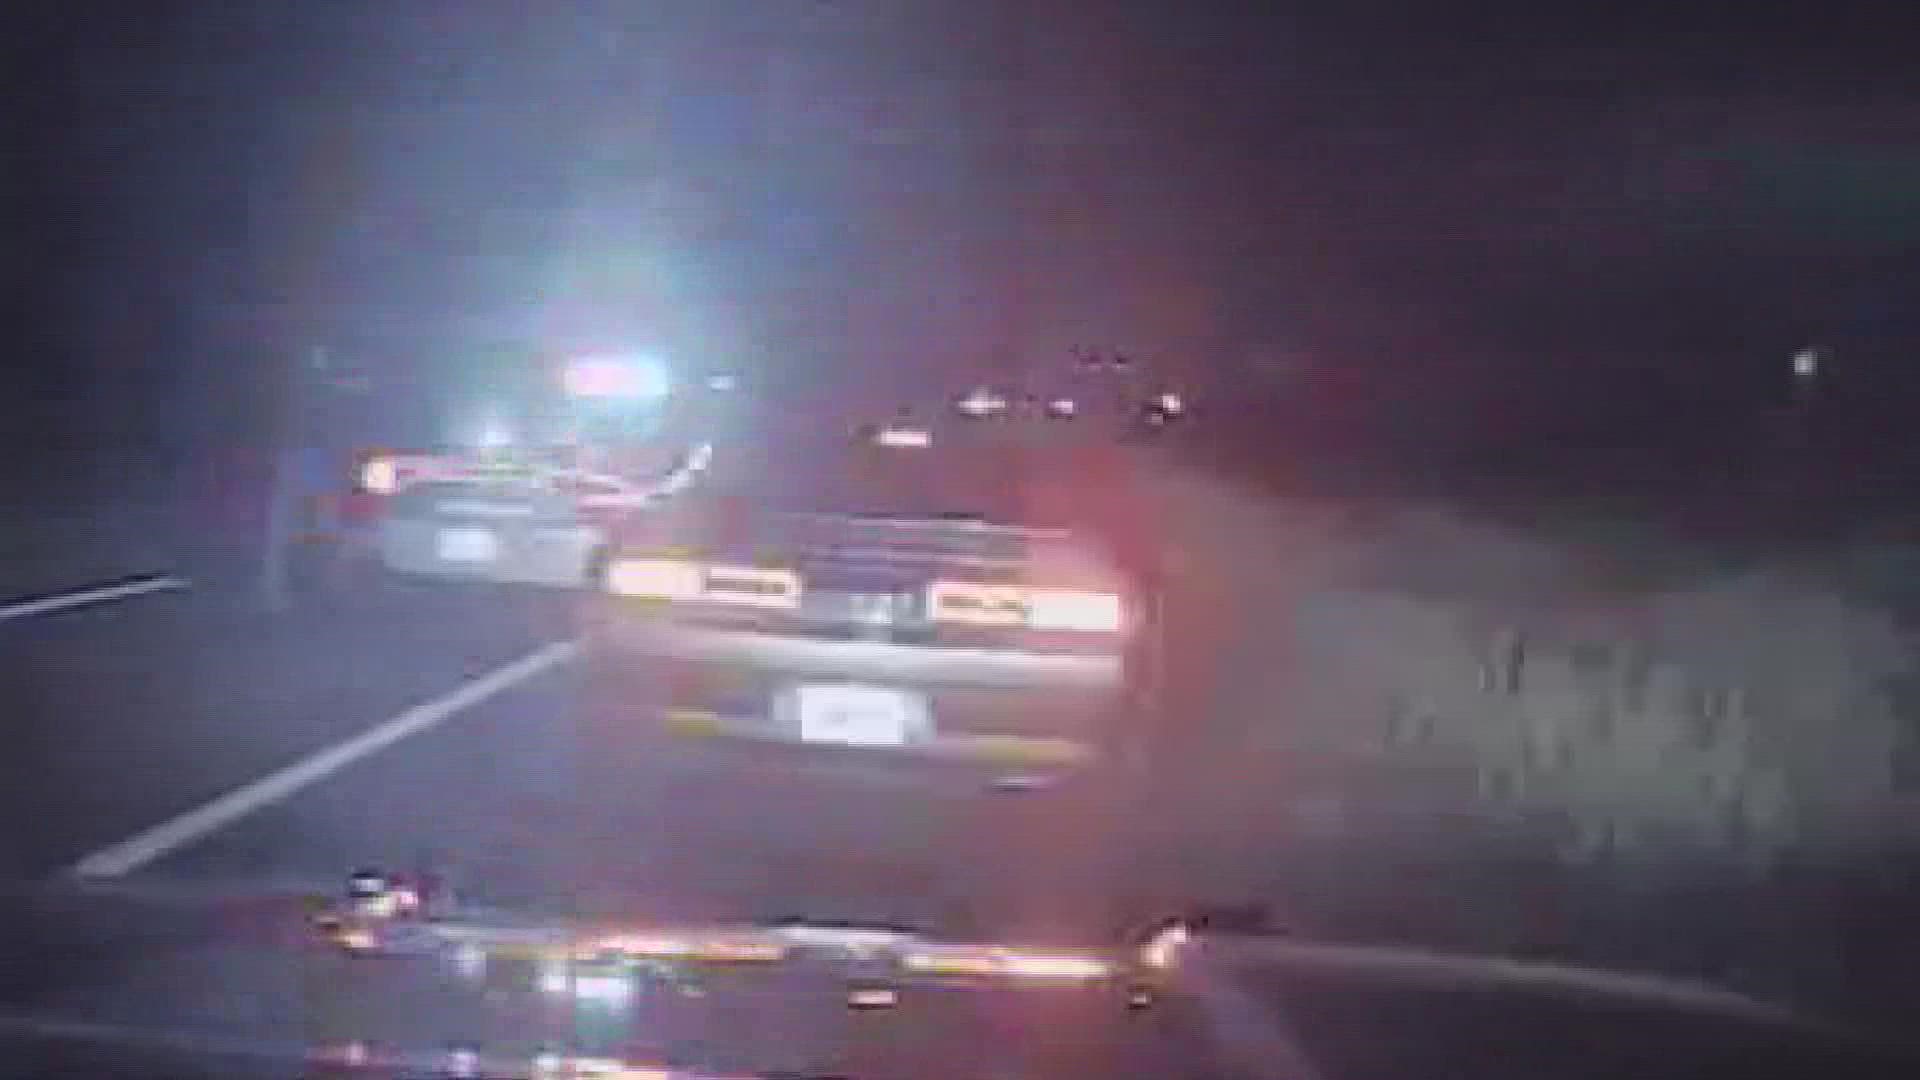 New video shows Dejaune Anderson, Dawn Coleman and 5-year-old Cairo Jordan in the hands of law enforcement after a police chase in South Carolina.